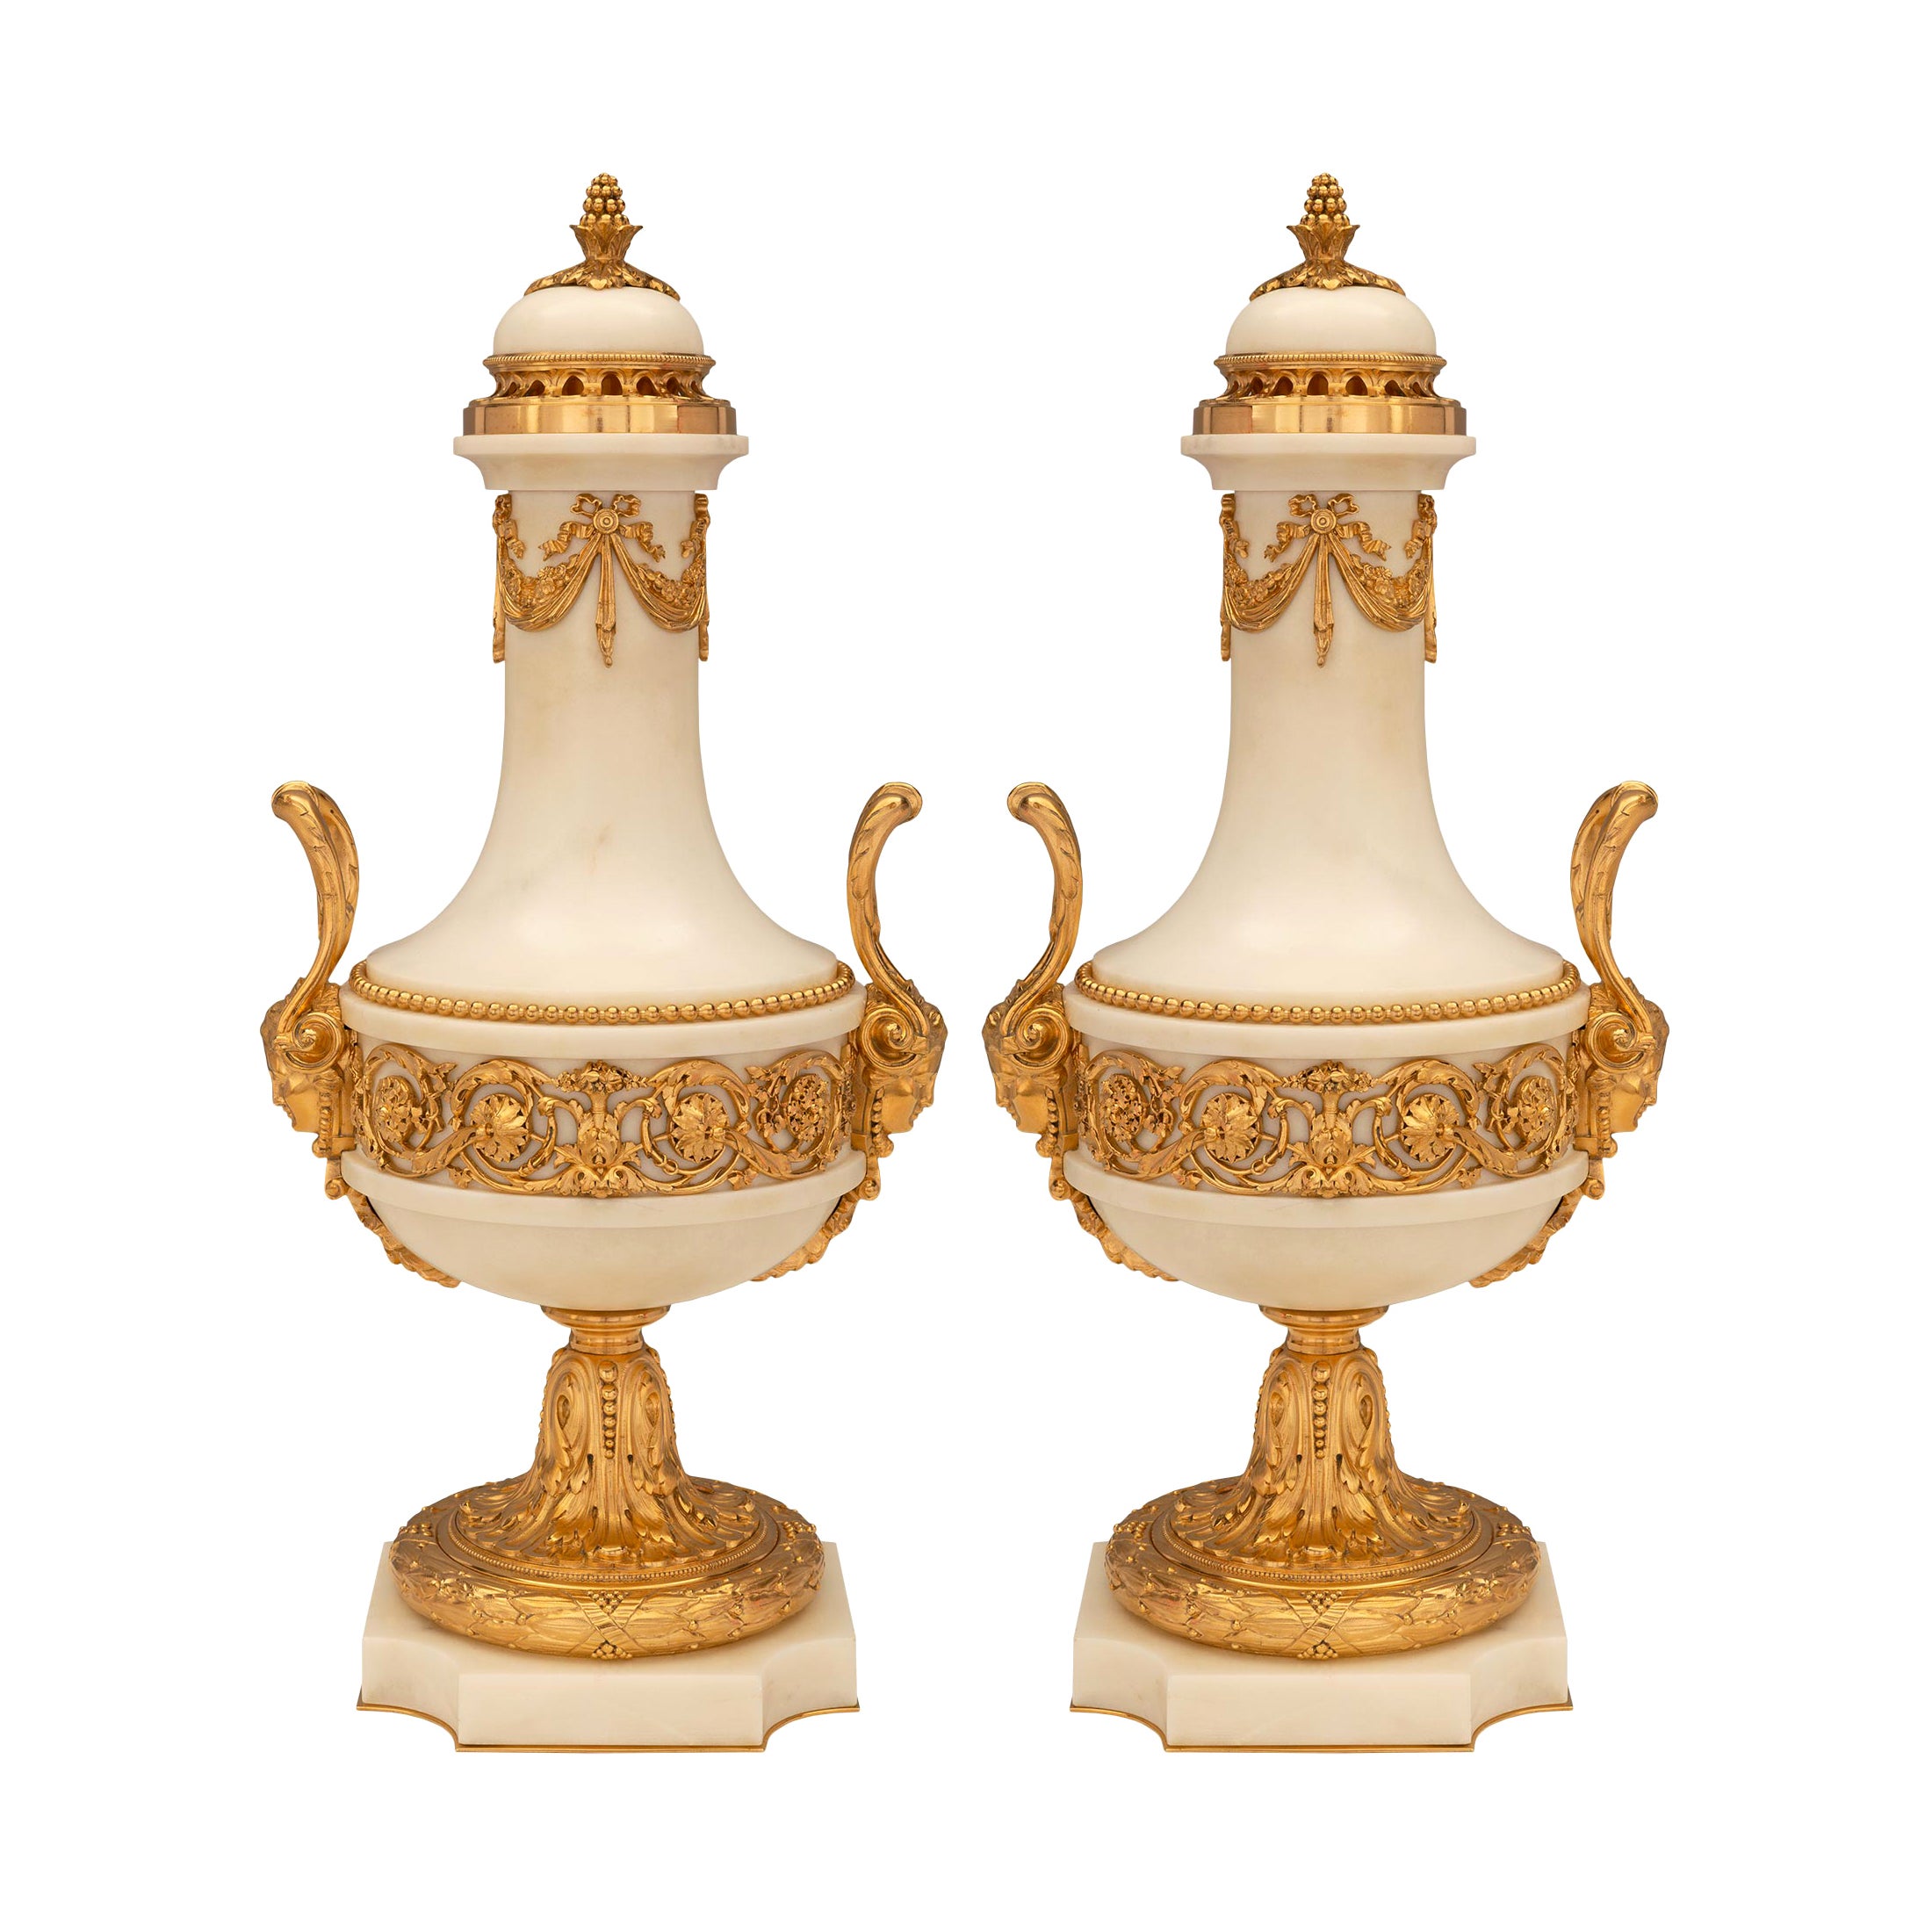 Pair Of French 19th Century Belle Époque Period Marble And Ormolu Lidded Urns